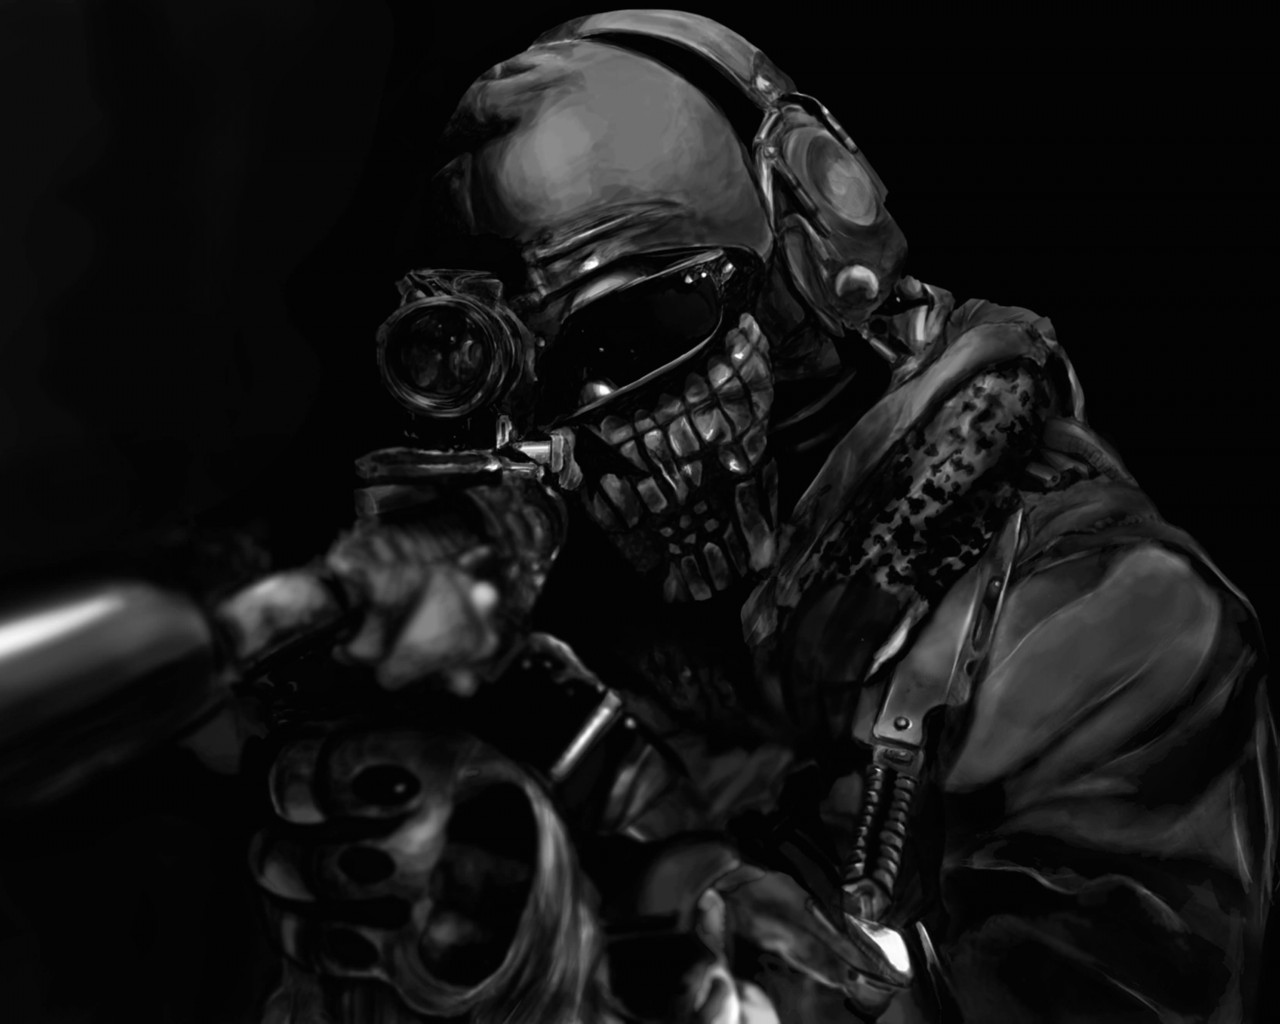 Call of Duty Ghost Masked Warrior Wallpaper for Desktop 1280x1024